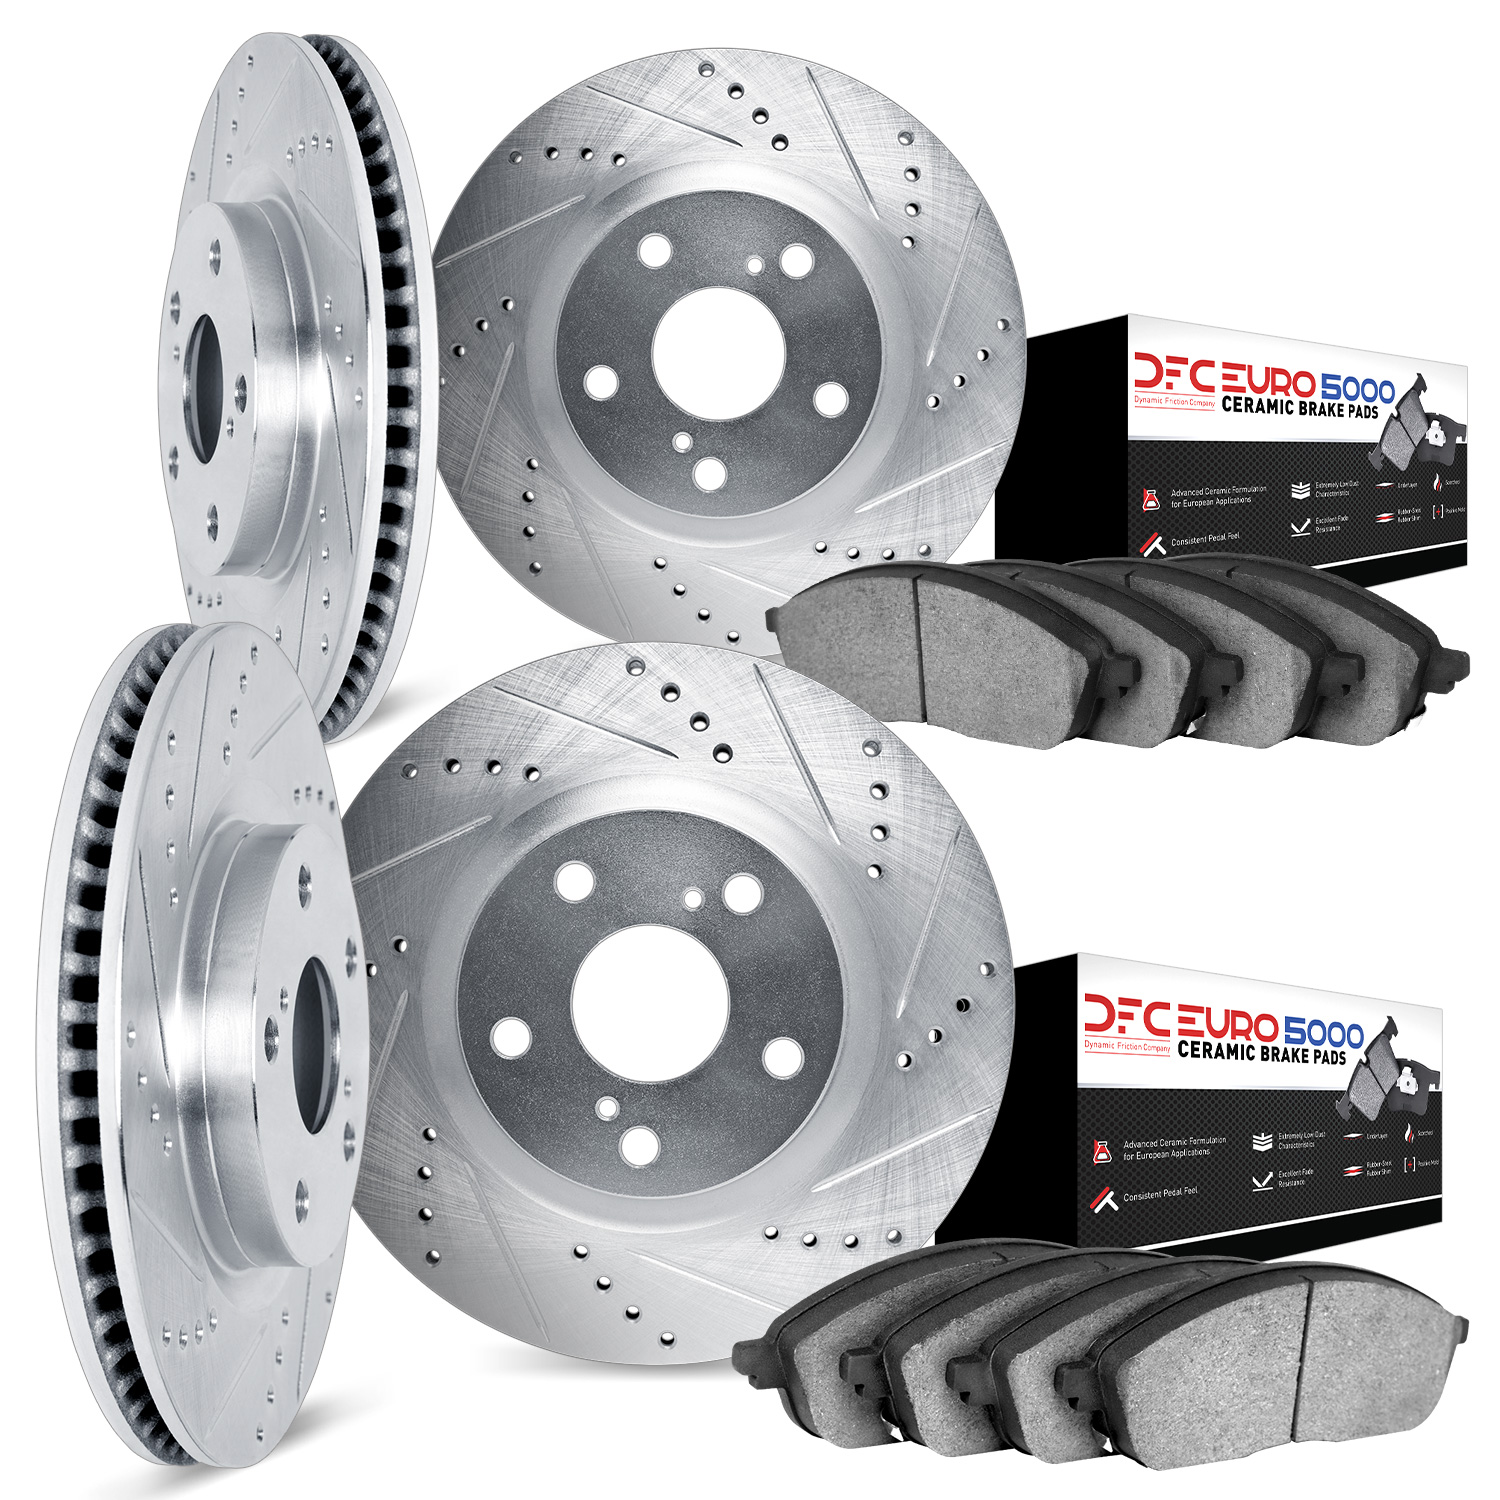 7604-31028 Drilled/Slotted Brake Rotors w/5000 Euro Ceramic Brake Pads Kit [Silver], 2012-2016 BMW, Position: Front and Rear